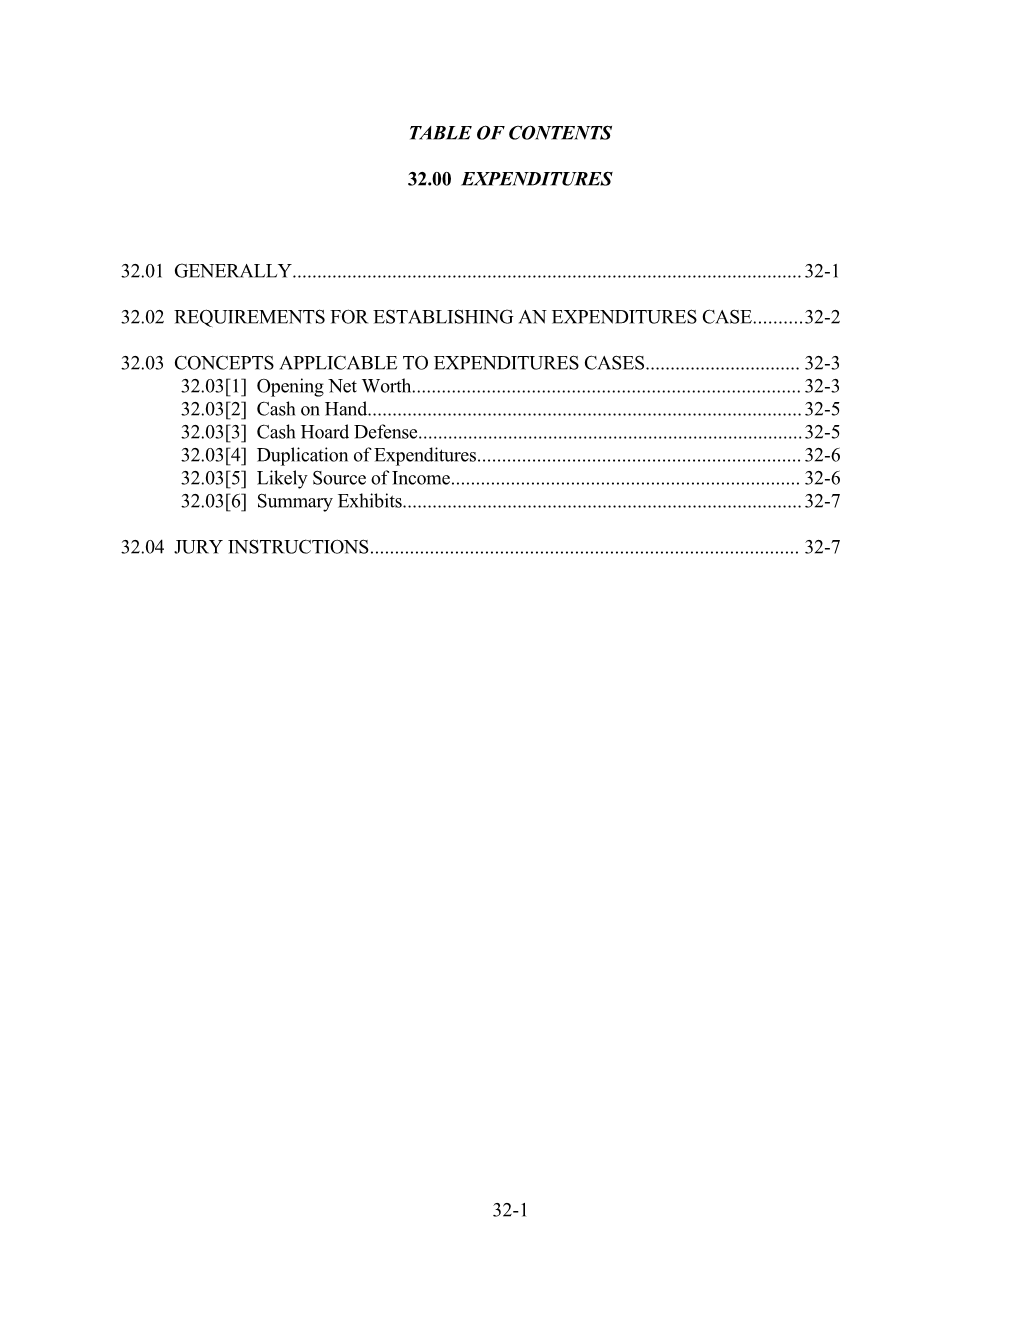 32.02 Requirements for Establishing an Expenditures Case 322